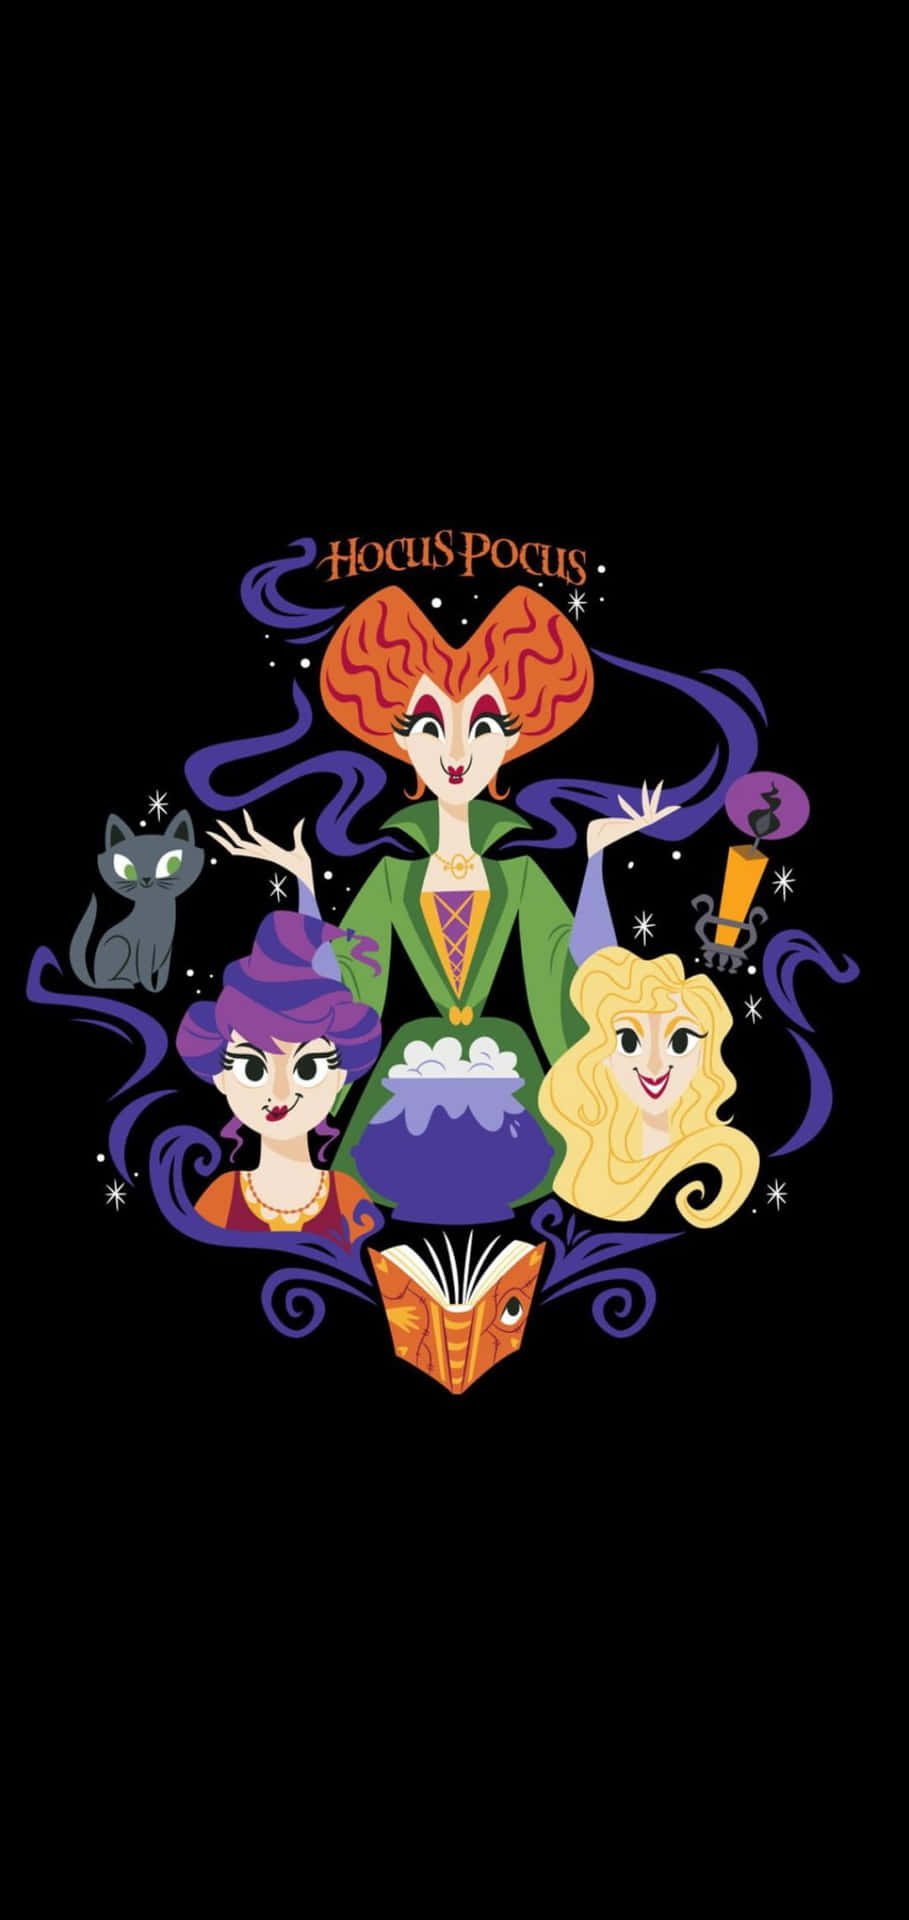 Happy Halloween with The Sanderson Sisters from Hocus Pocus